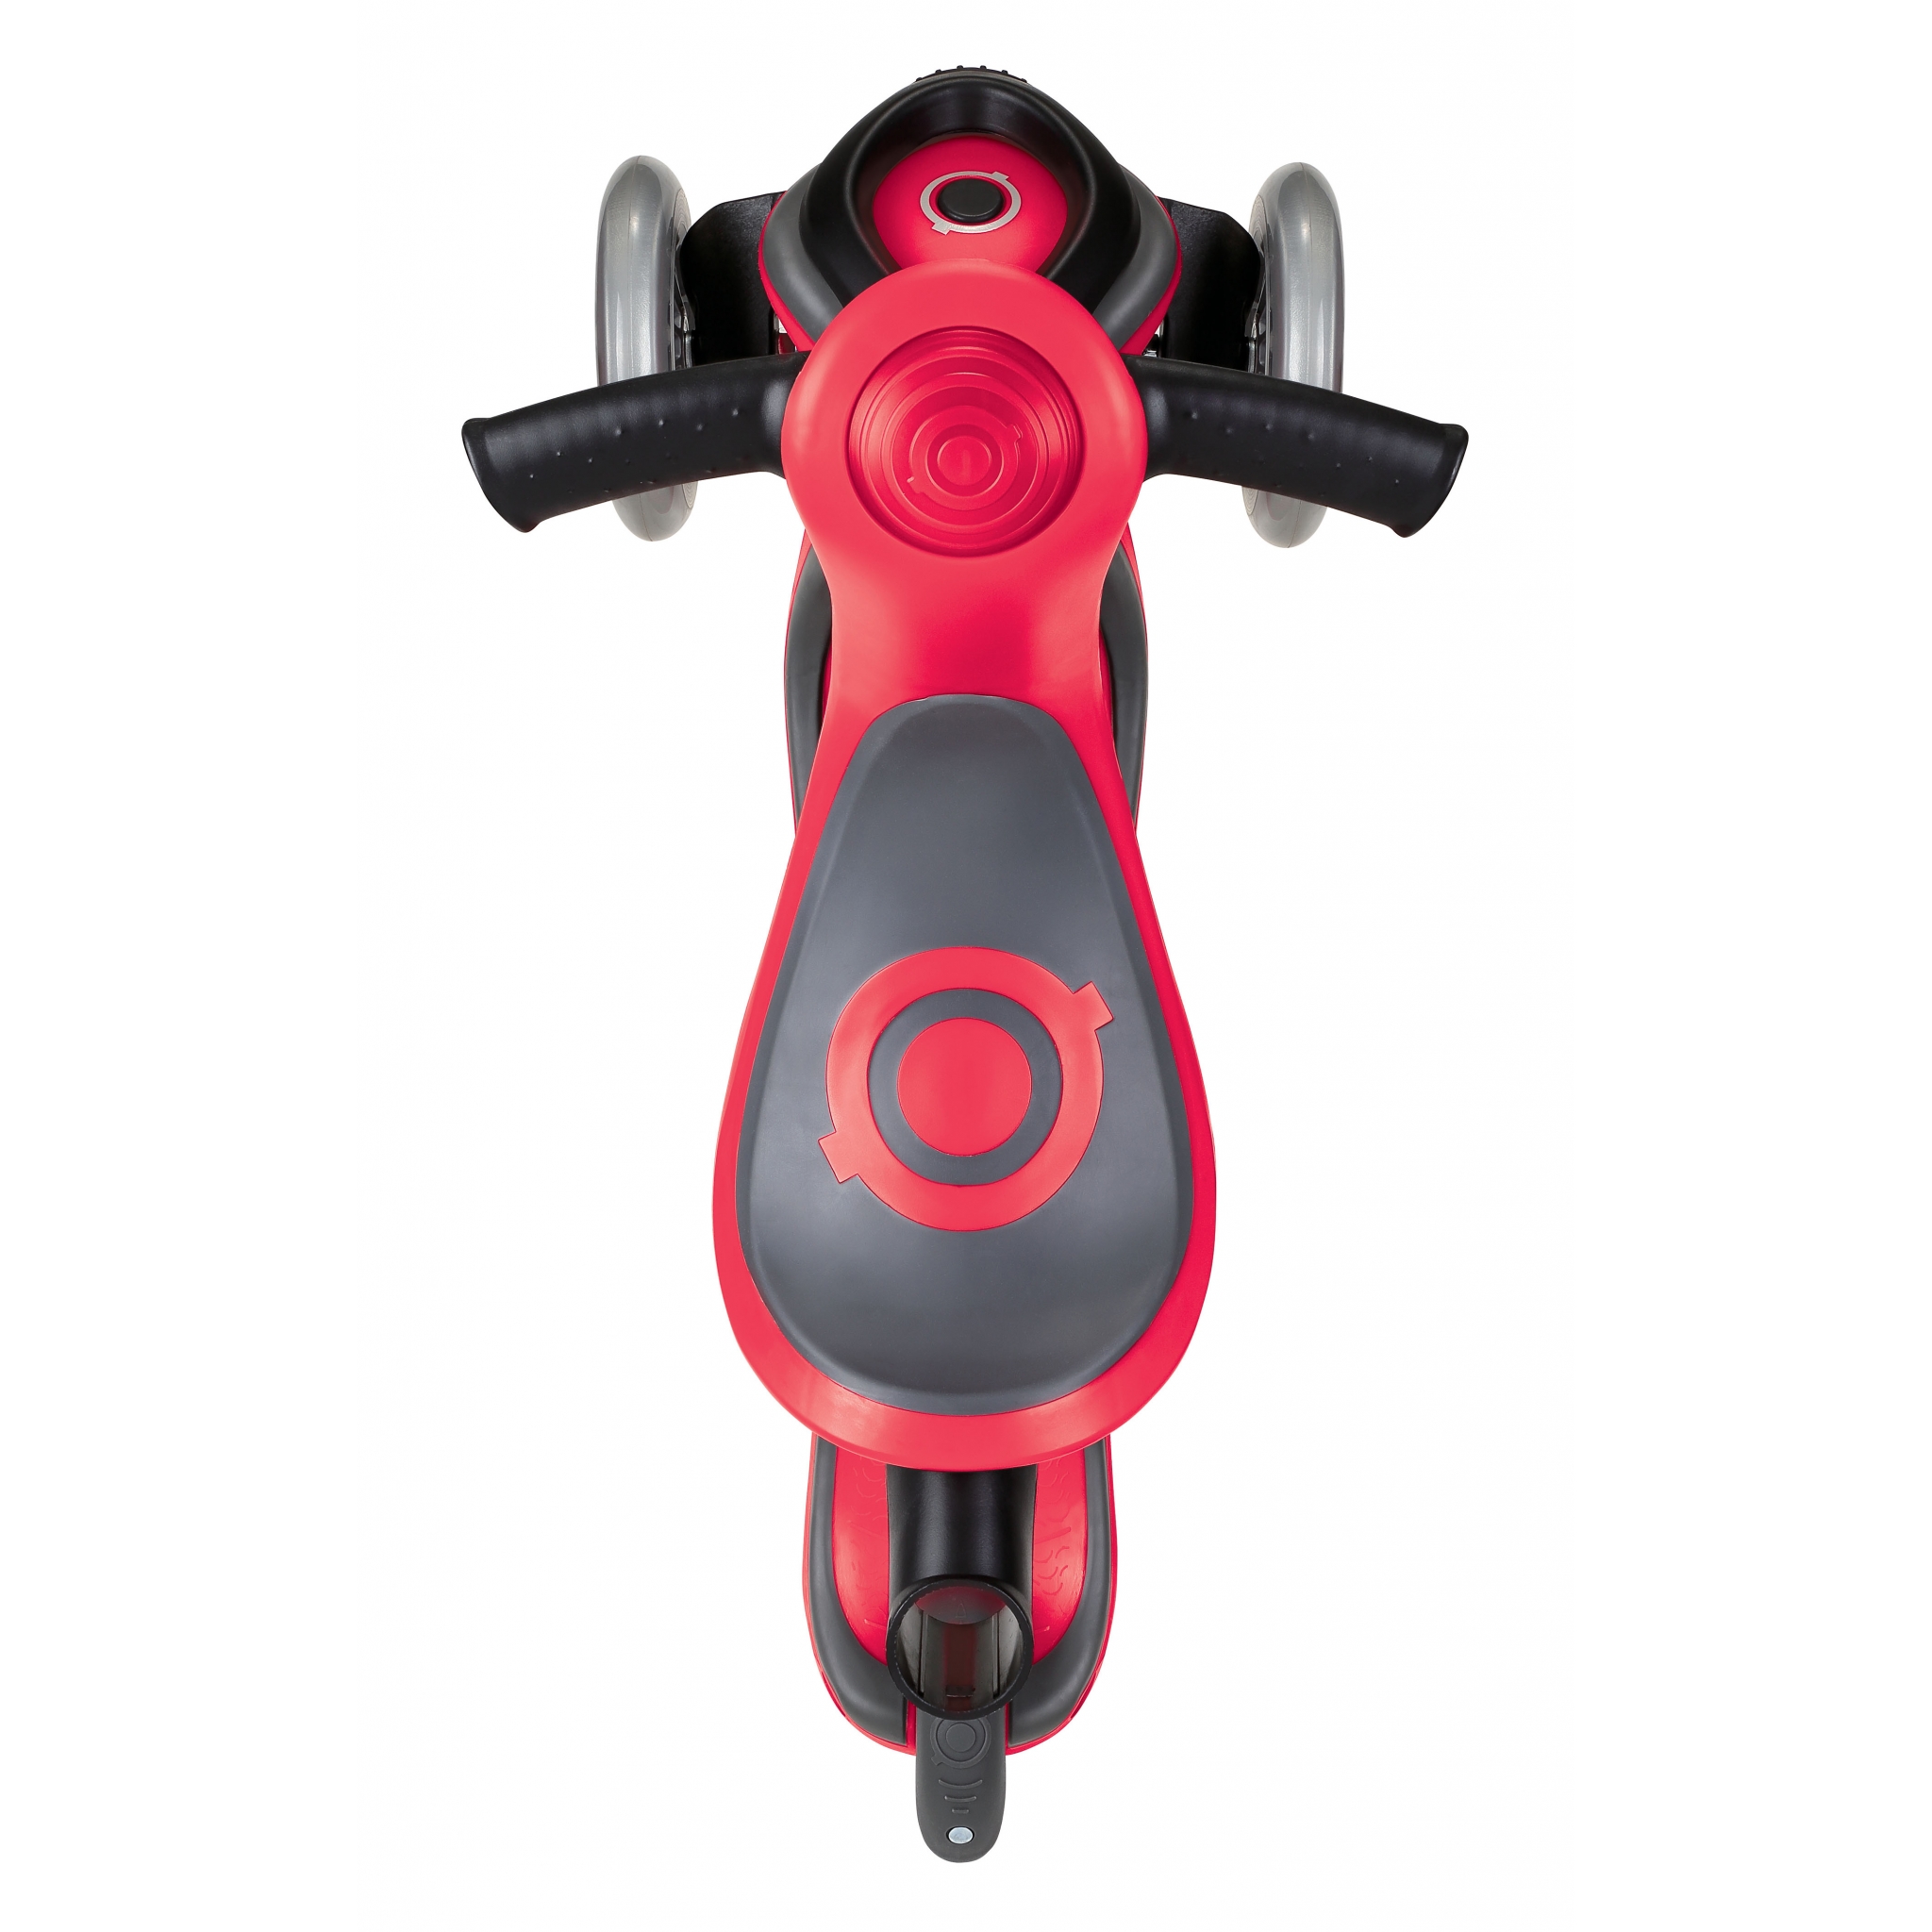 GO-UP-COMFORT-scooter-with-seat-extra-wide-seat-for-maximum-comfort-new-red 3